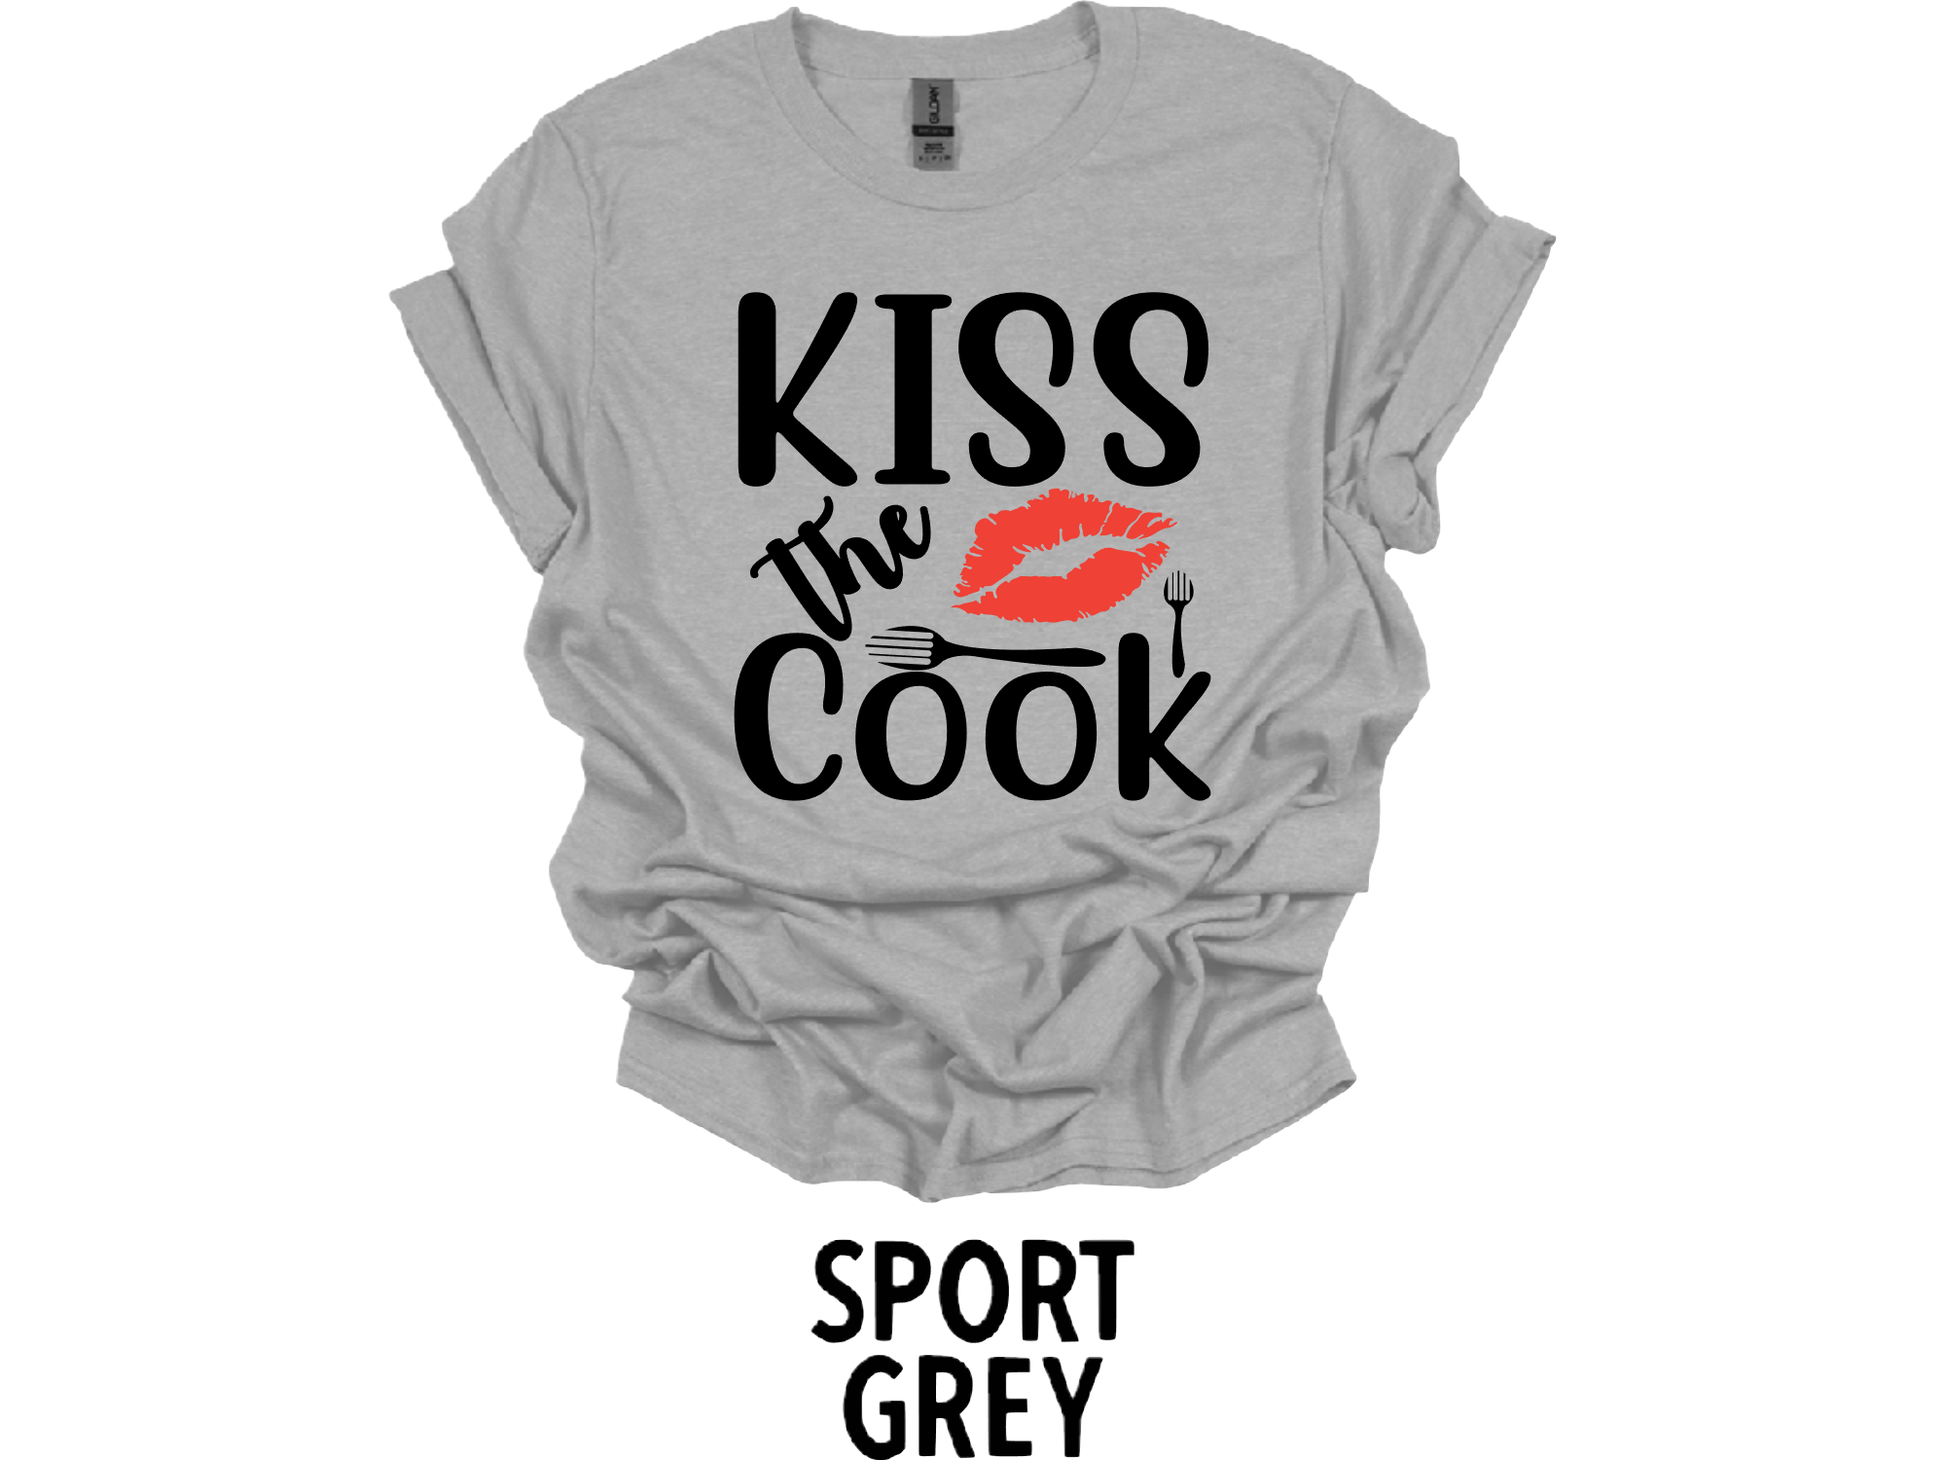 Kiss the cook t-shirt or hoodie (New Arrival) - smuniqueshirts